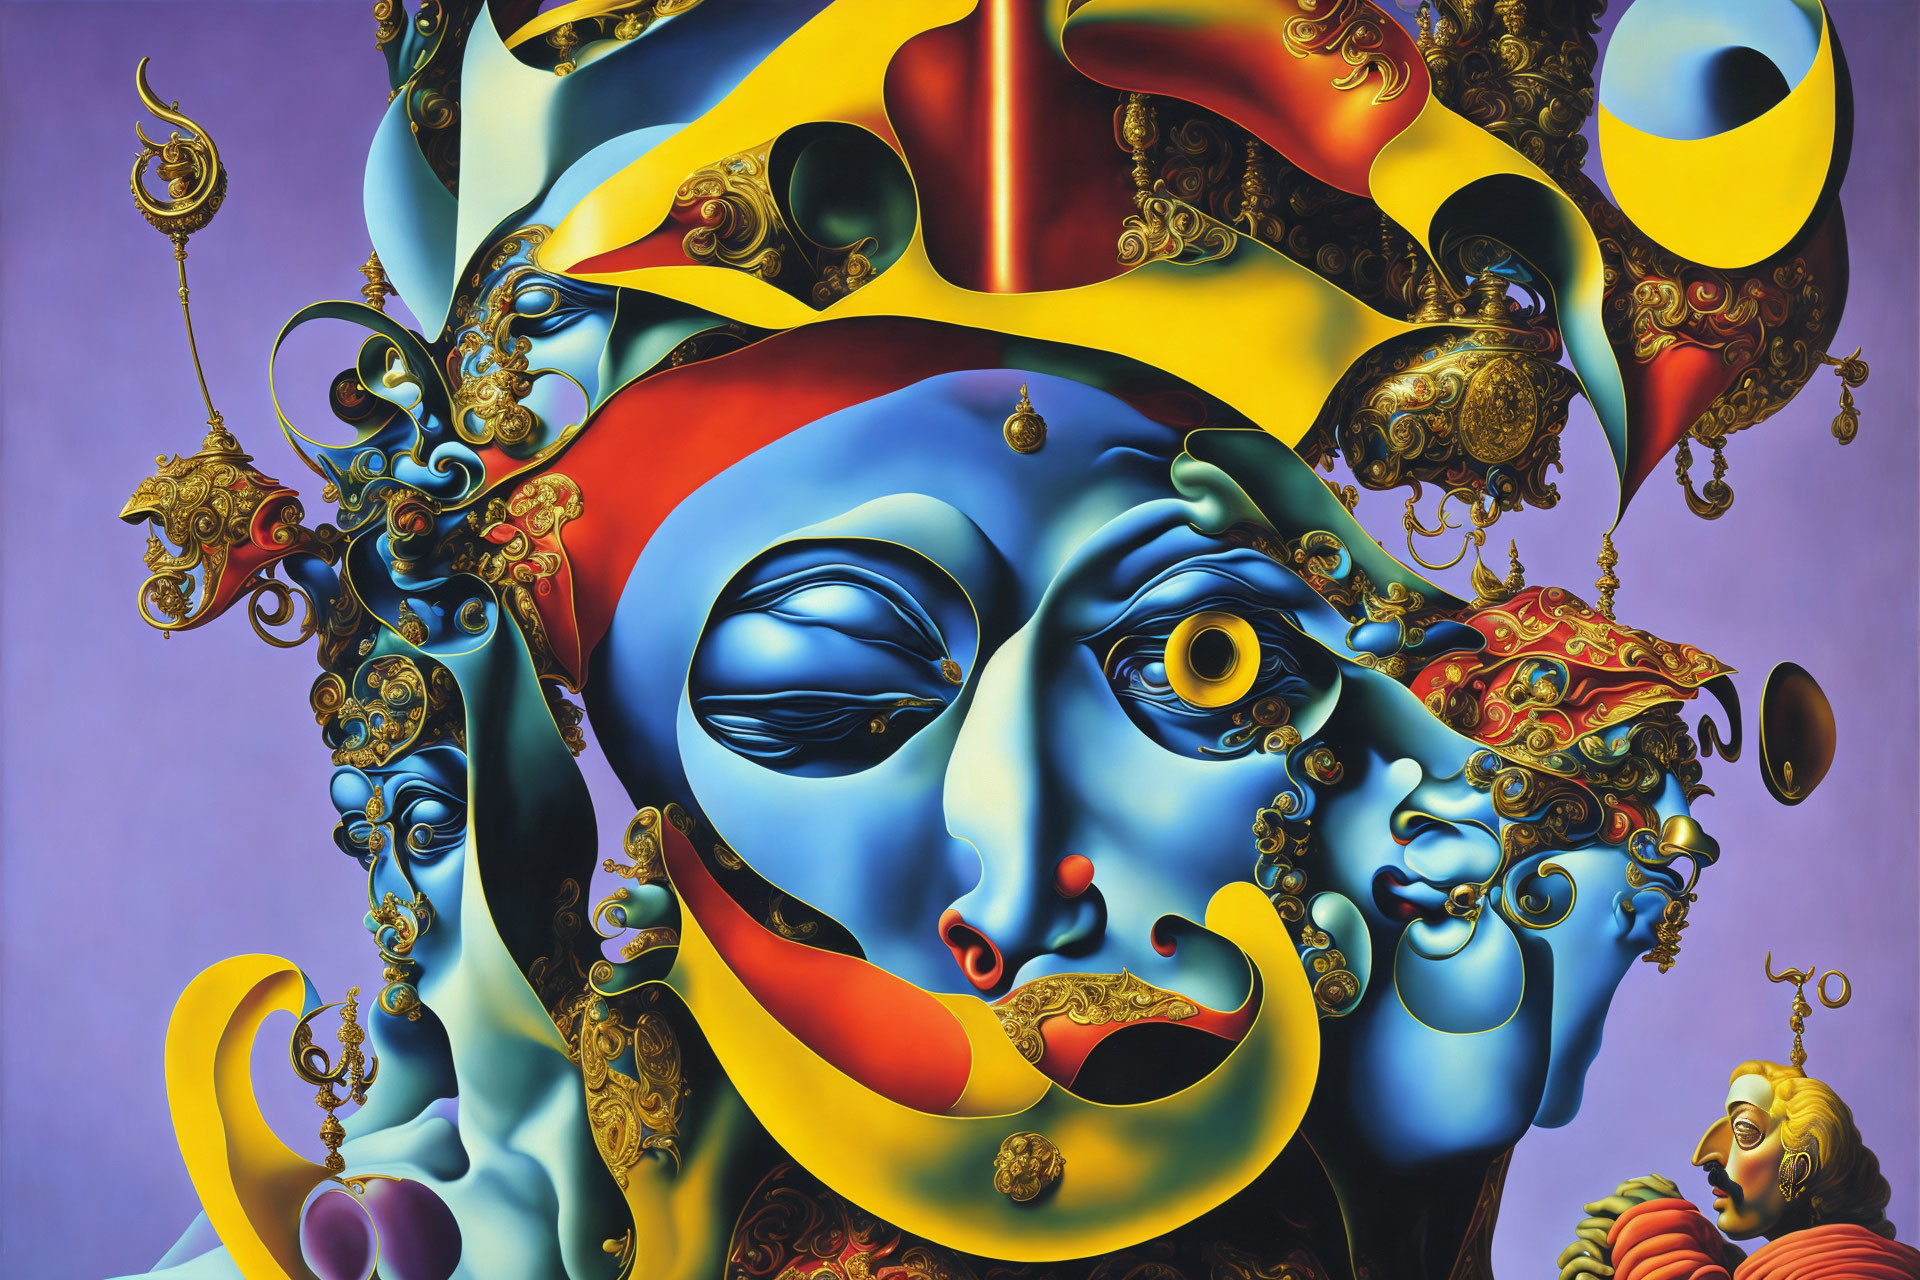 Colorful Surrealist Painting with Composite Face & Ornate Designs